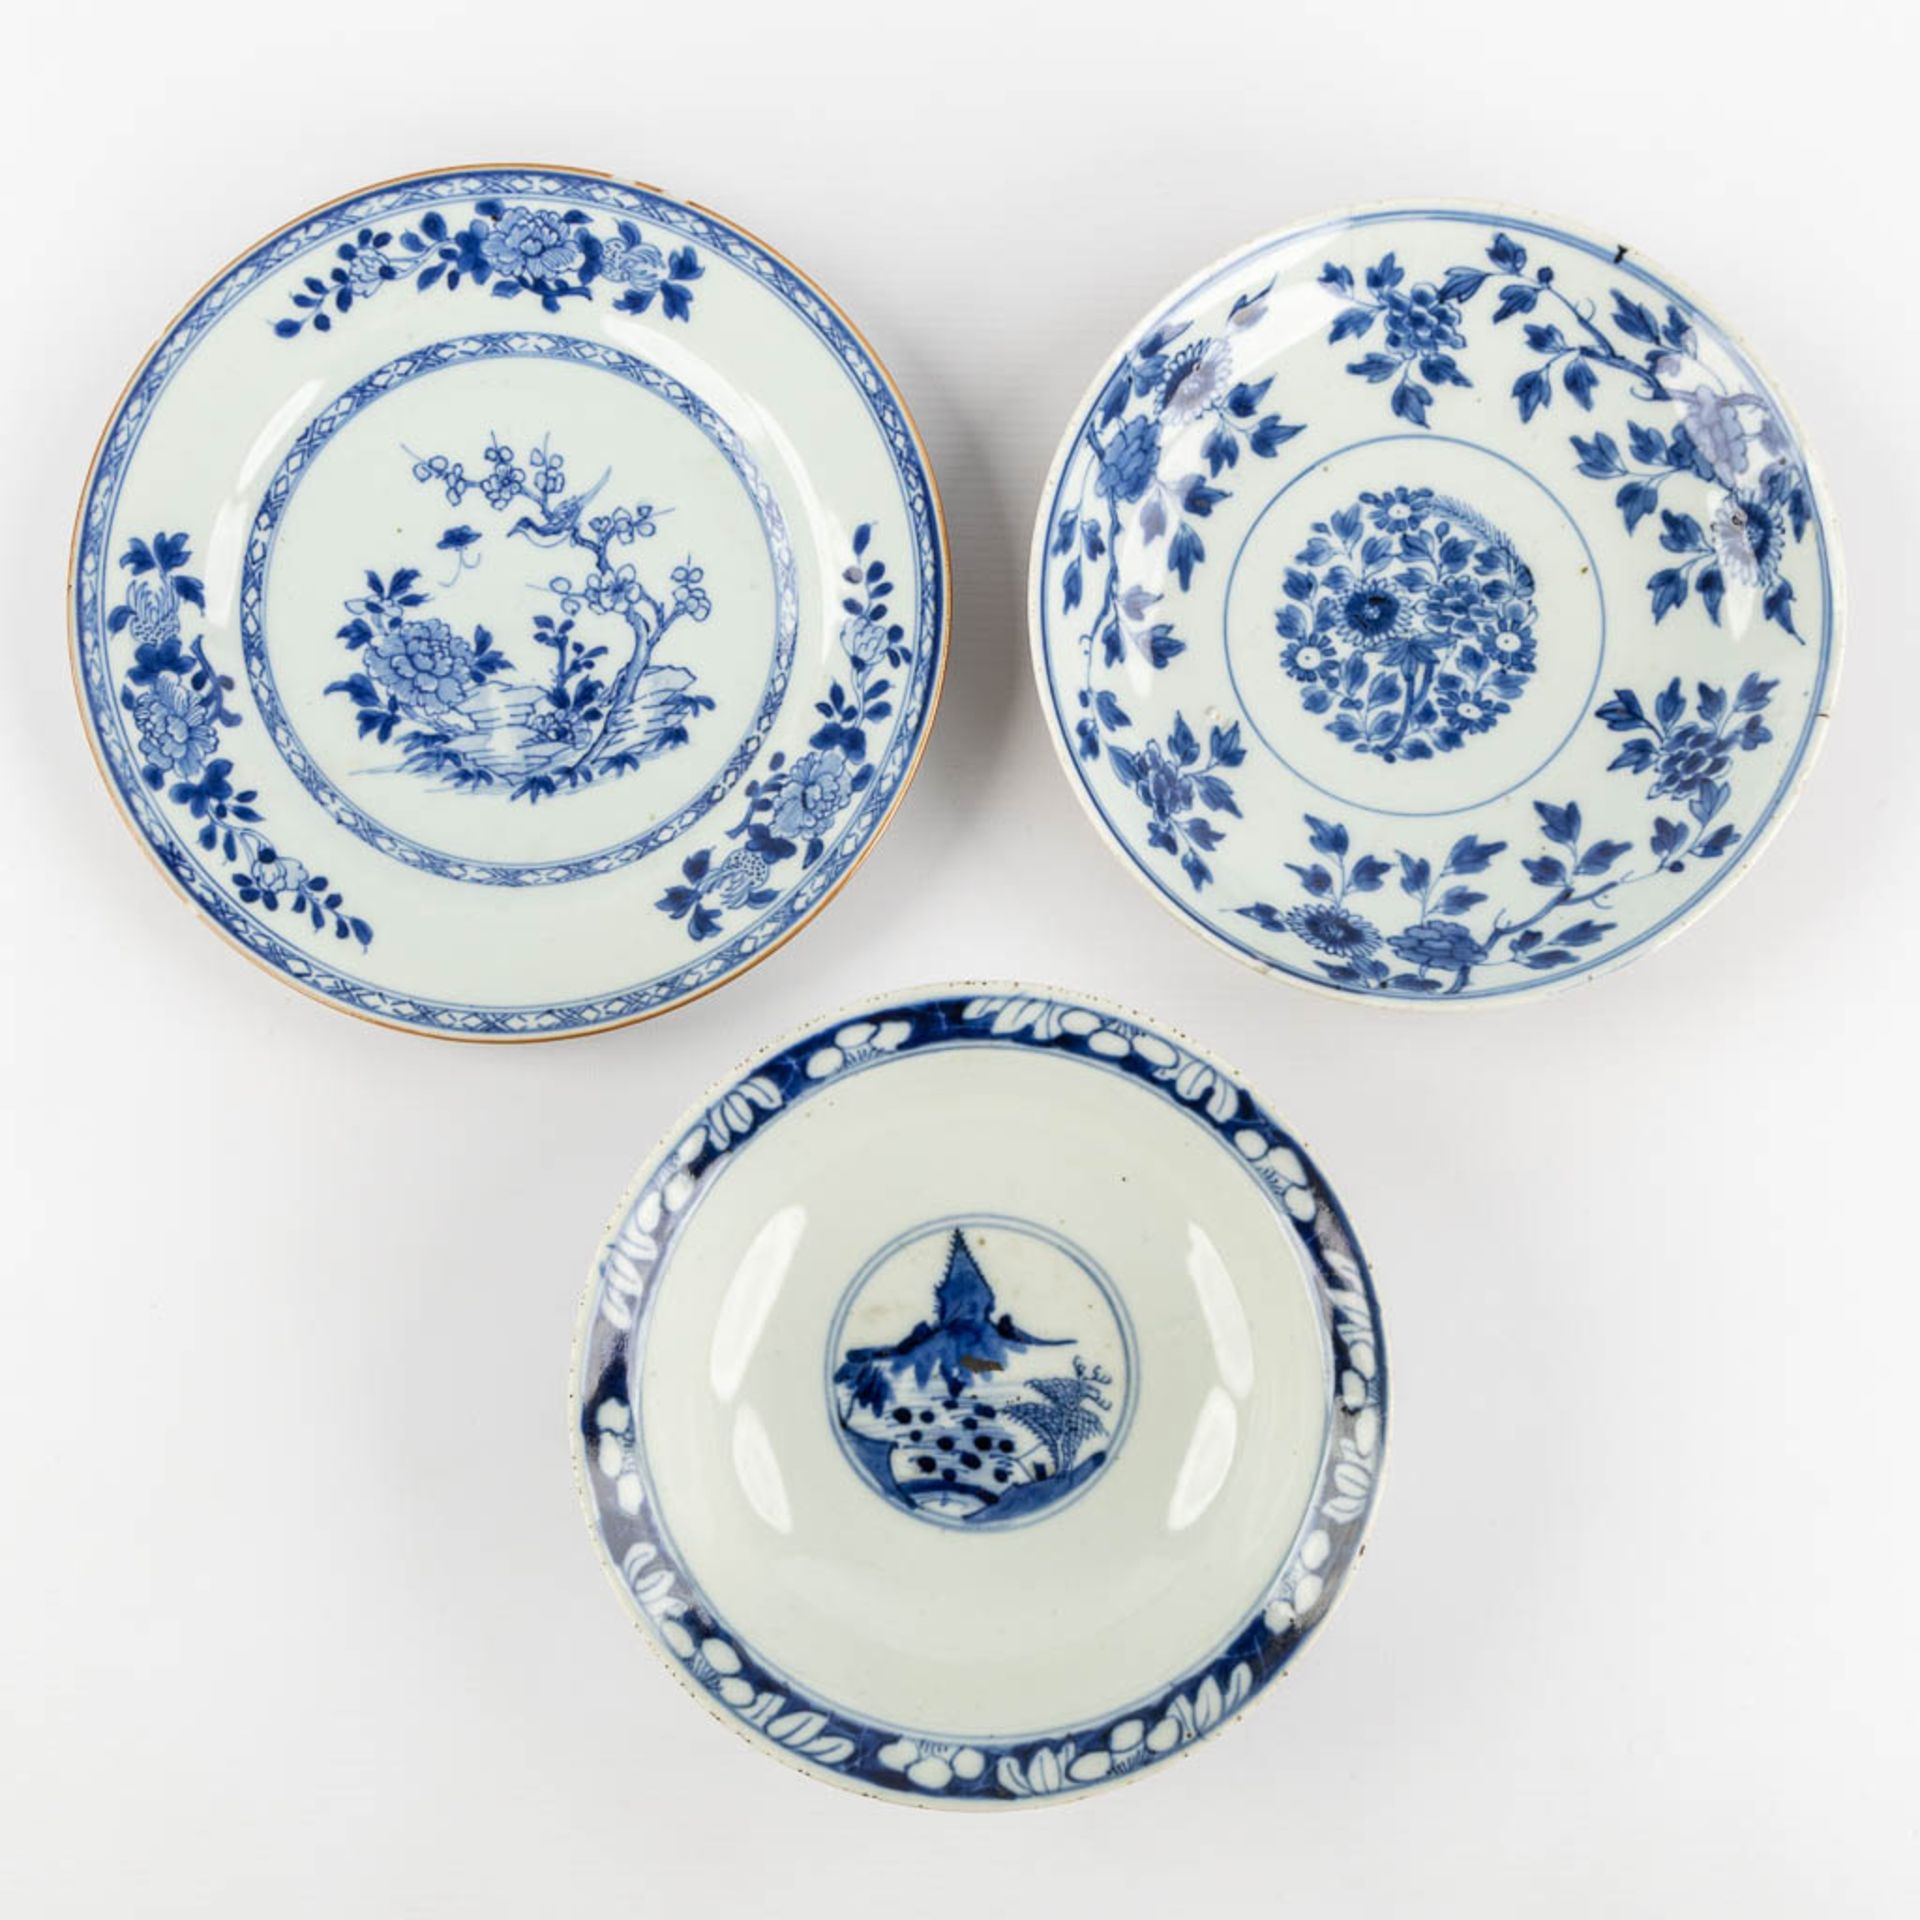 Fifteen Chinese cups, saucers and plates, blue white and Famille Roze. (D:23,4 cm) - Image 5 of 15